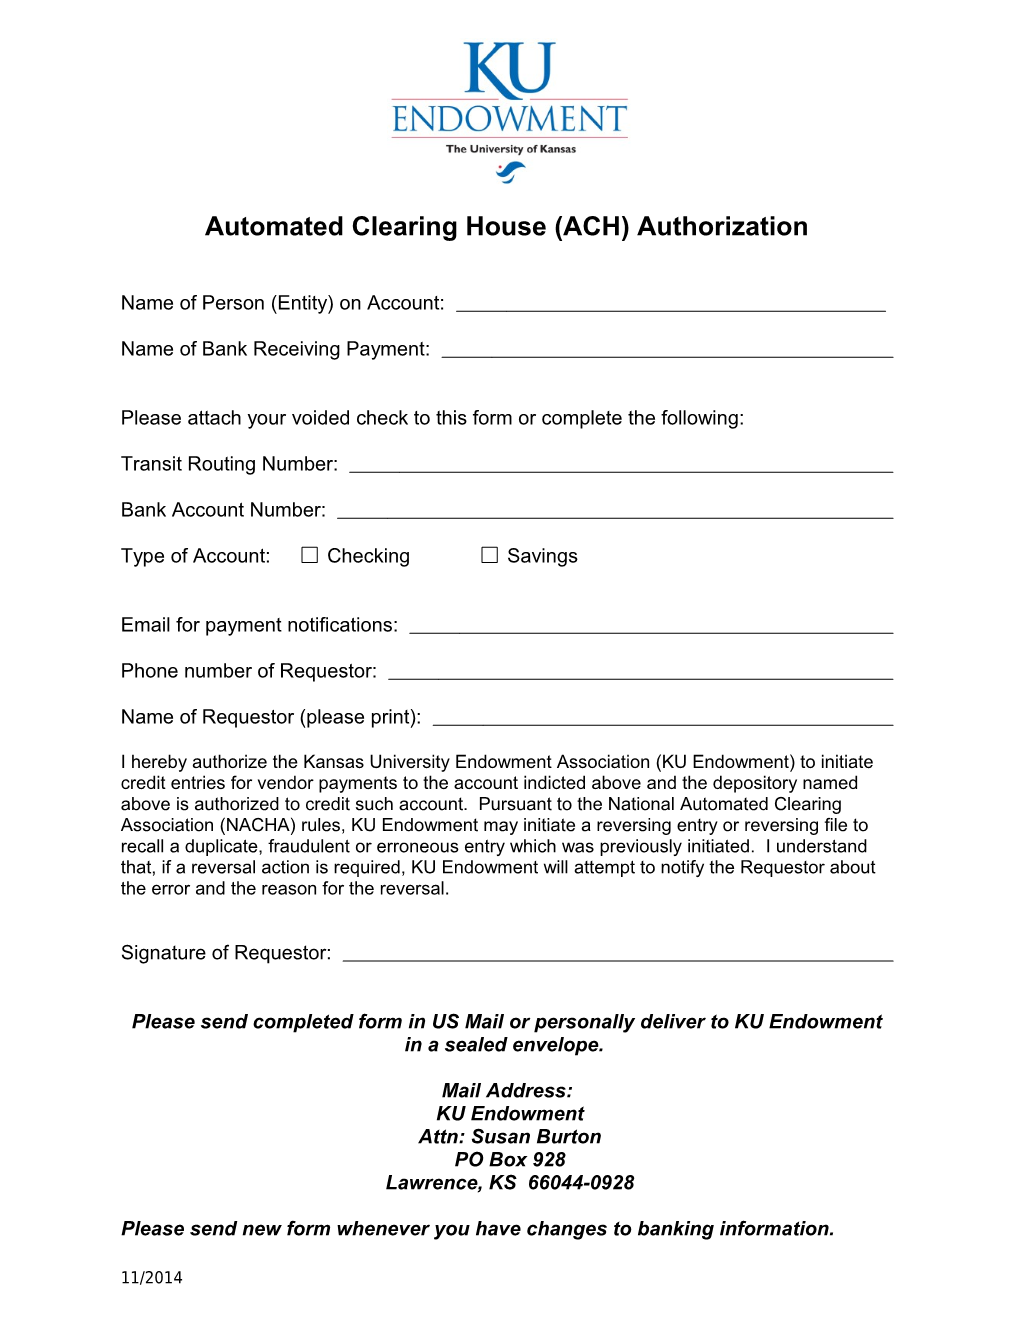 Automated Clearing House (ACH) Authorization